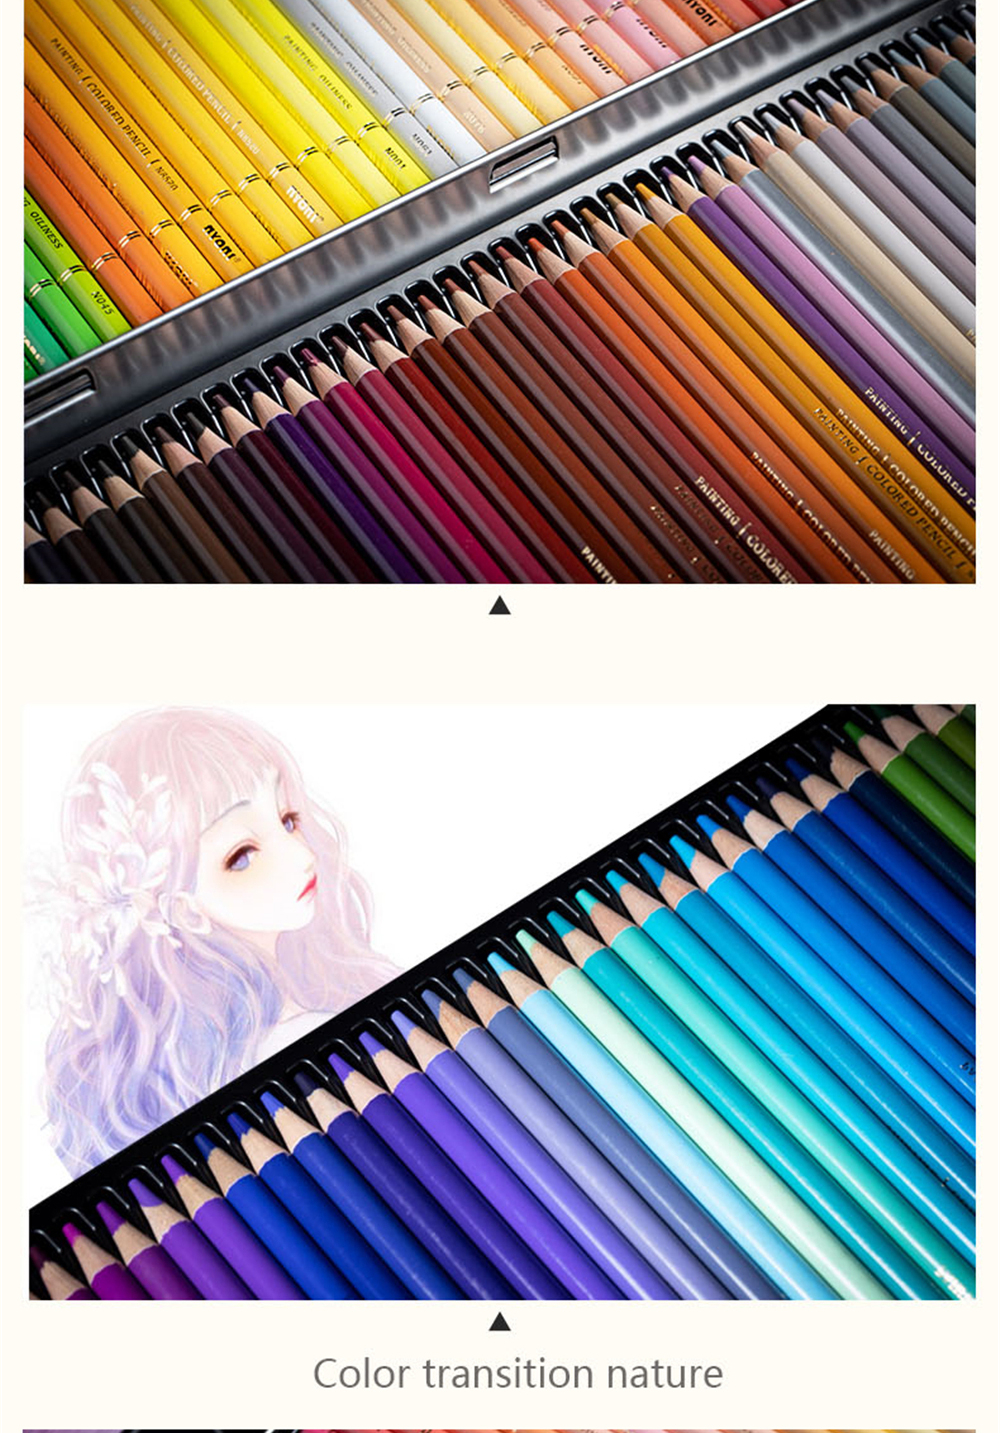 NYONI-364872120-Colors-Professional-Oil-Color-Pencil-Set-Hand-Painted-Sketching-Pen-Stationery-for-S-1803626-11